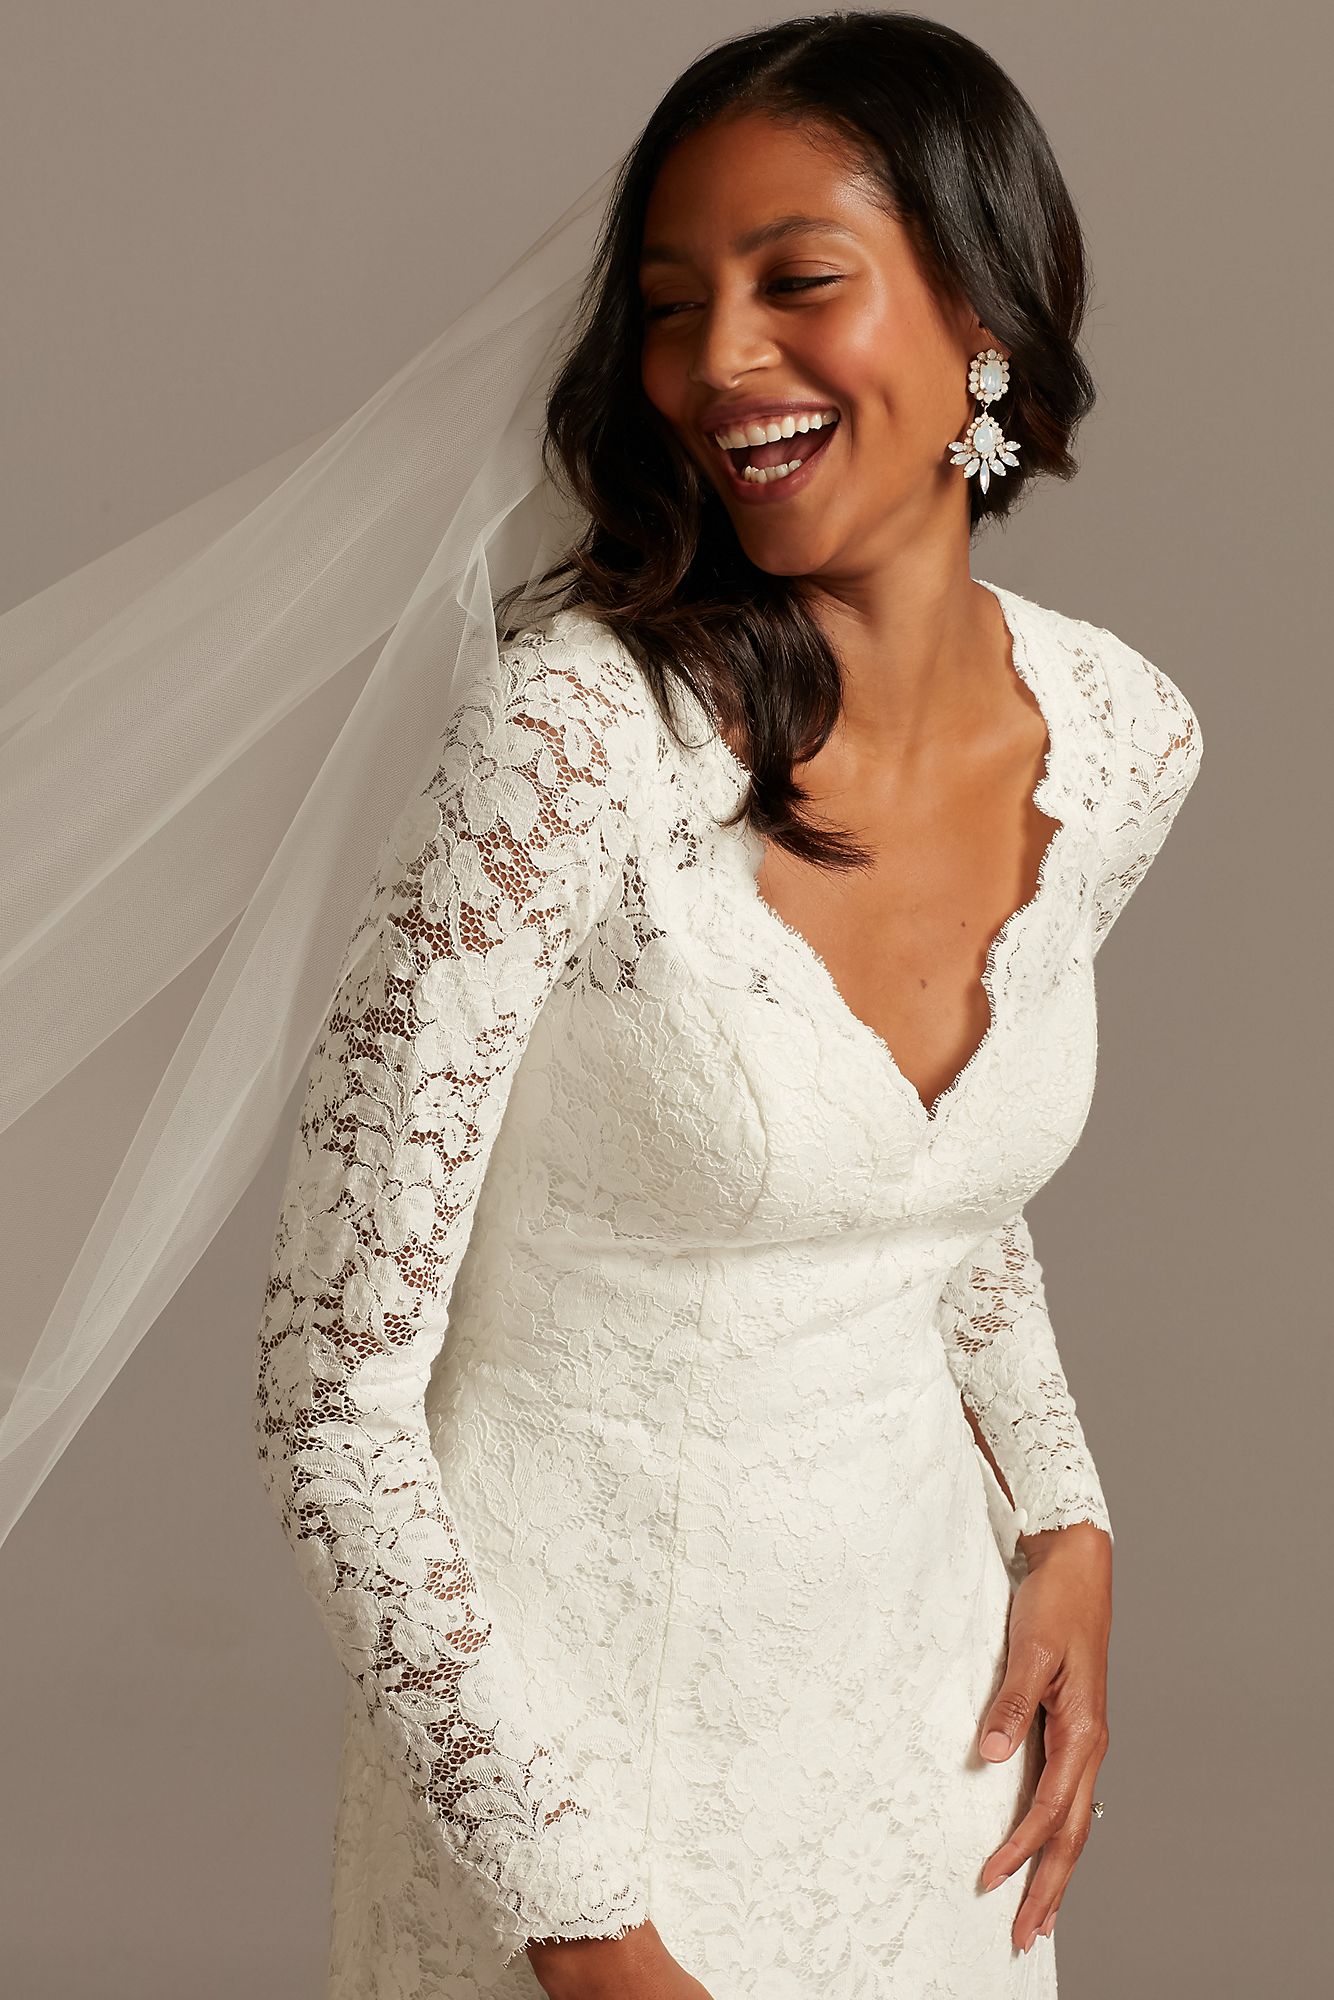 Petite Size Long Sleeves 7WG3987 Style Lace Bridal Dress with Open Back